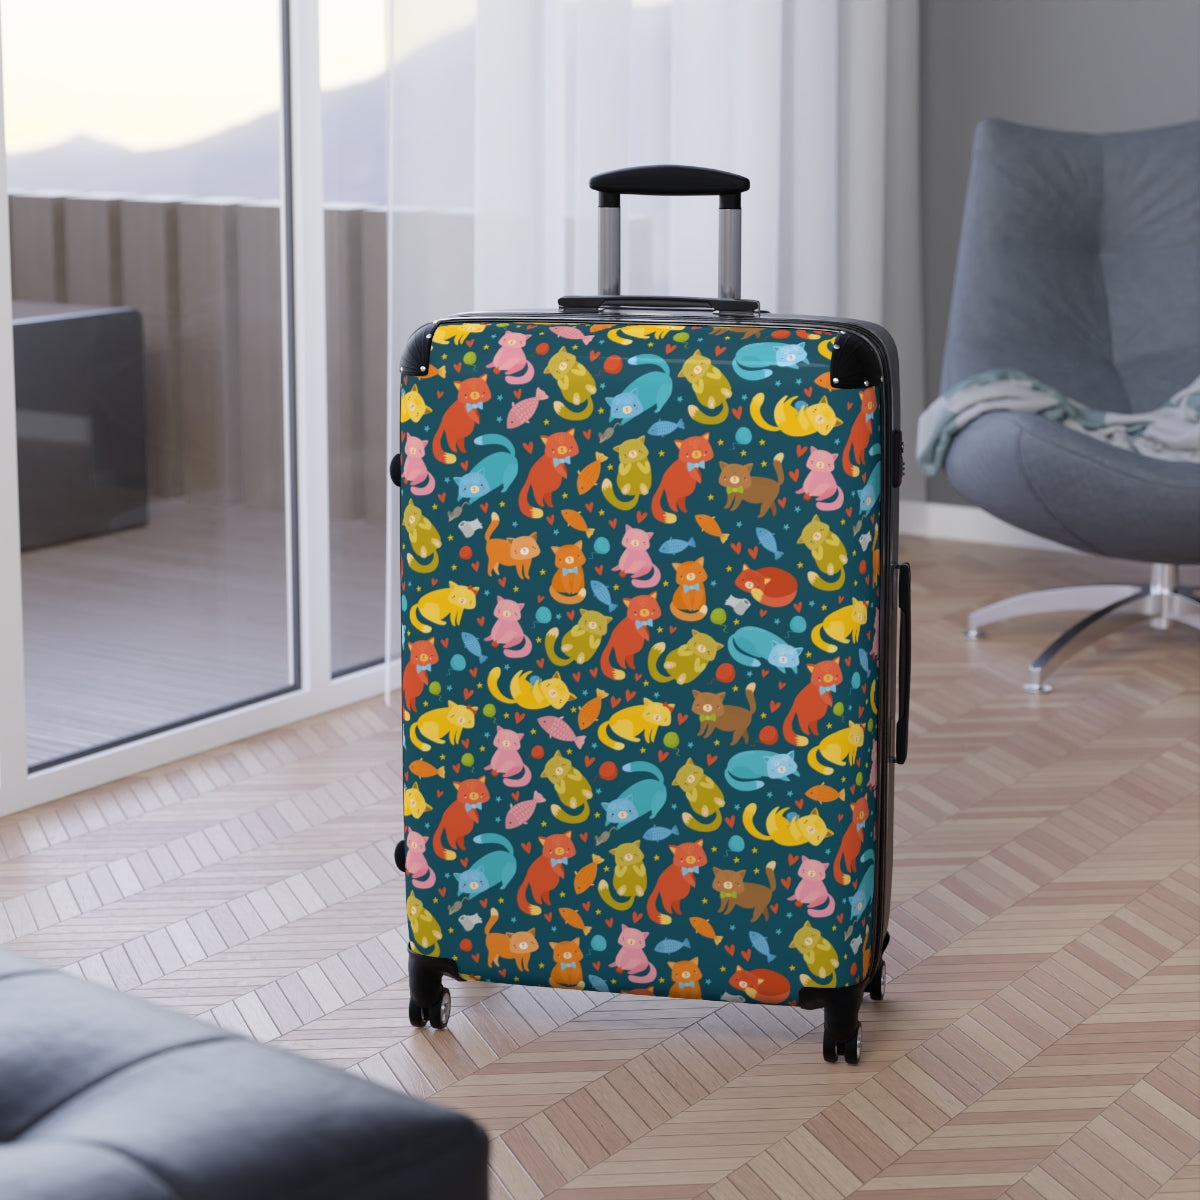 Suitcase with Cats On It, Luggage Carry On Cabin Travel Small Large Set Rolling Spinner Lock Decorative Hard Shell Wheels Women Case Starcove Fashion